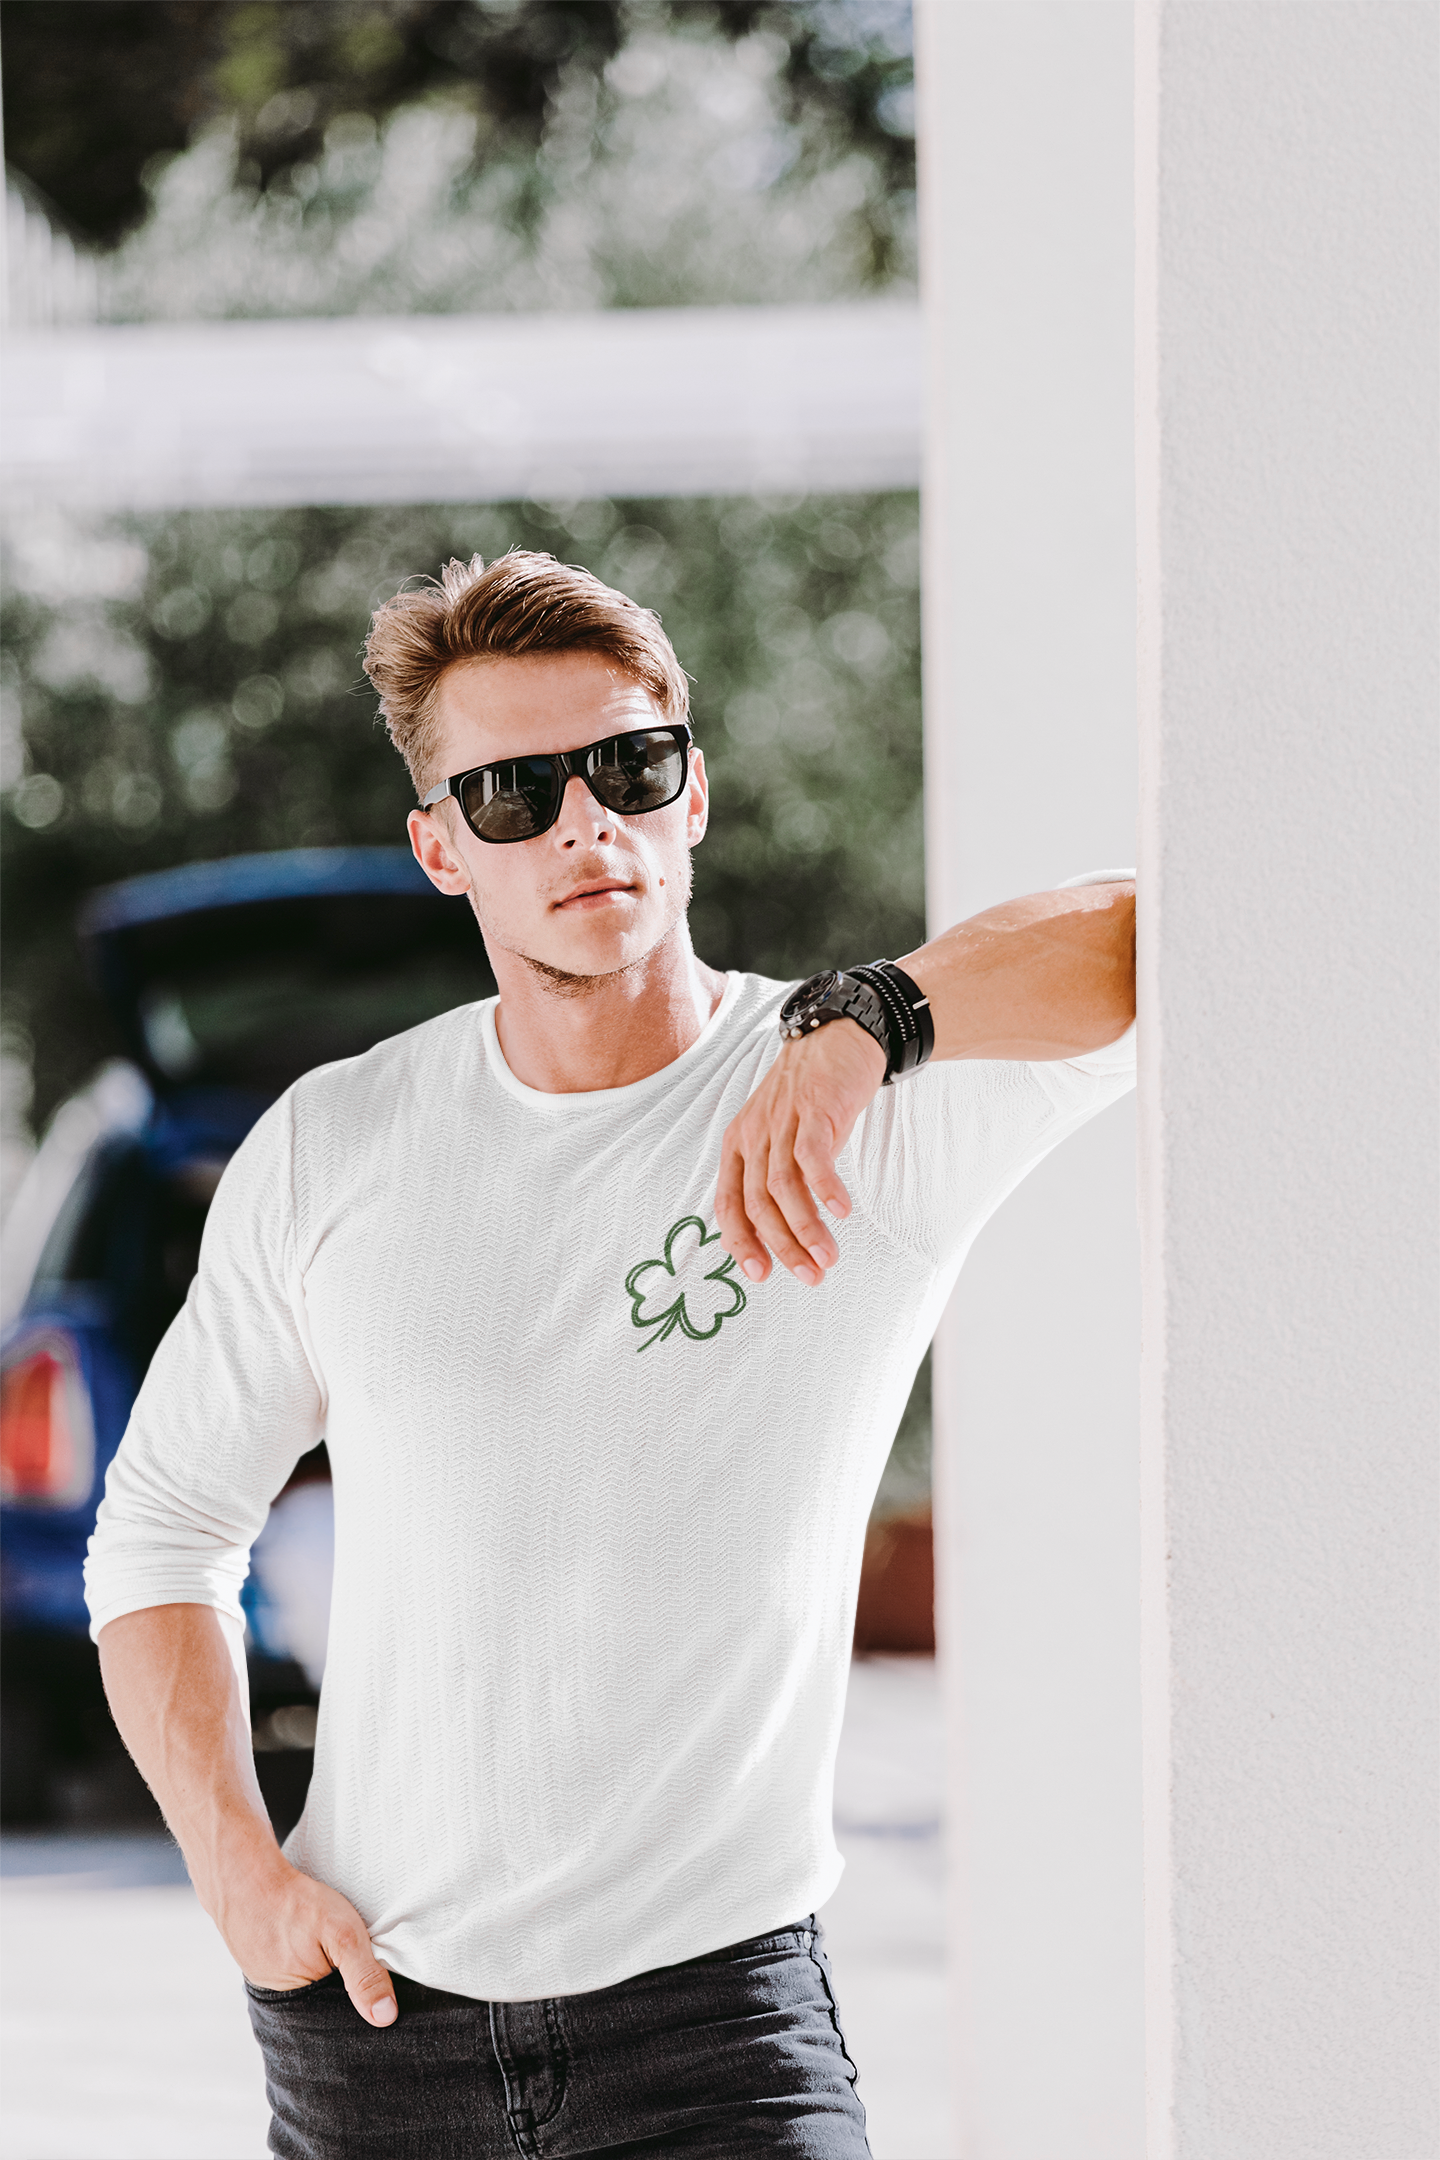 Feeling Lucky Long Sleeve Shirt in white. The back has a repetitive curvy saying "feeling lucky" with a smiley face making a peace sign with the eyes as clovers in green. The front has a four leaf clover pocket sale on the front in green. This is the front view of the shirt on a male model with sunglasses on leaning up against a pillar outside.